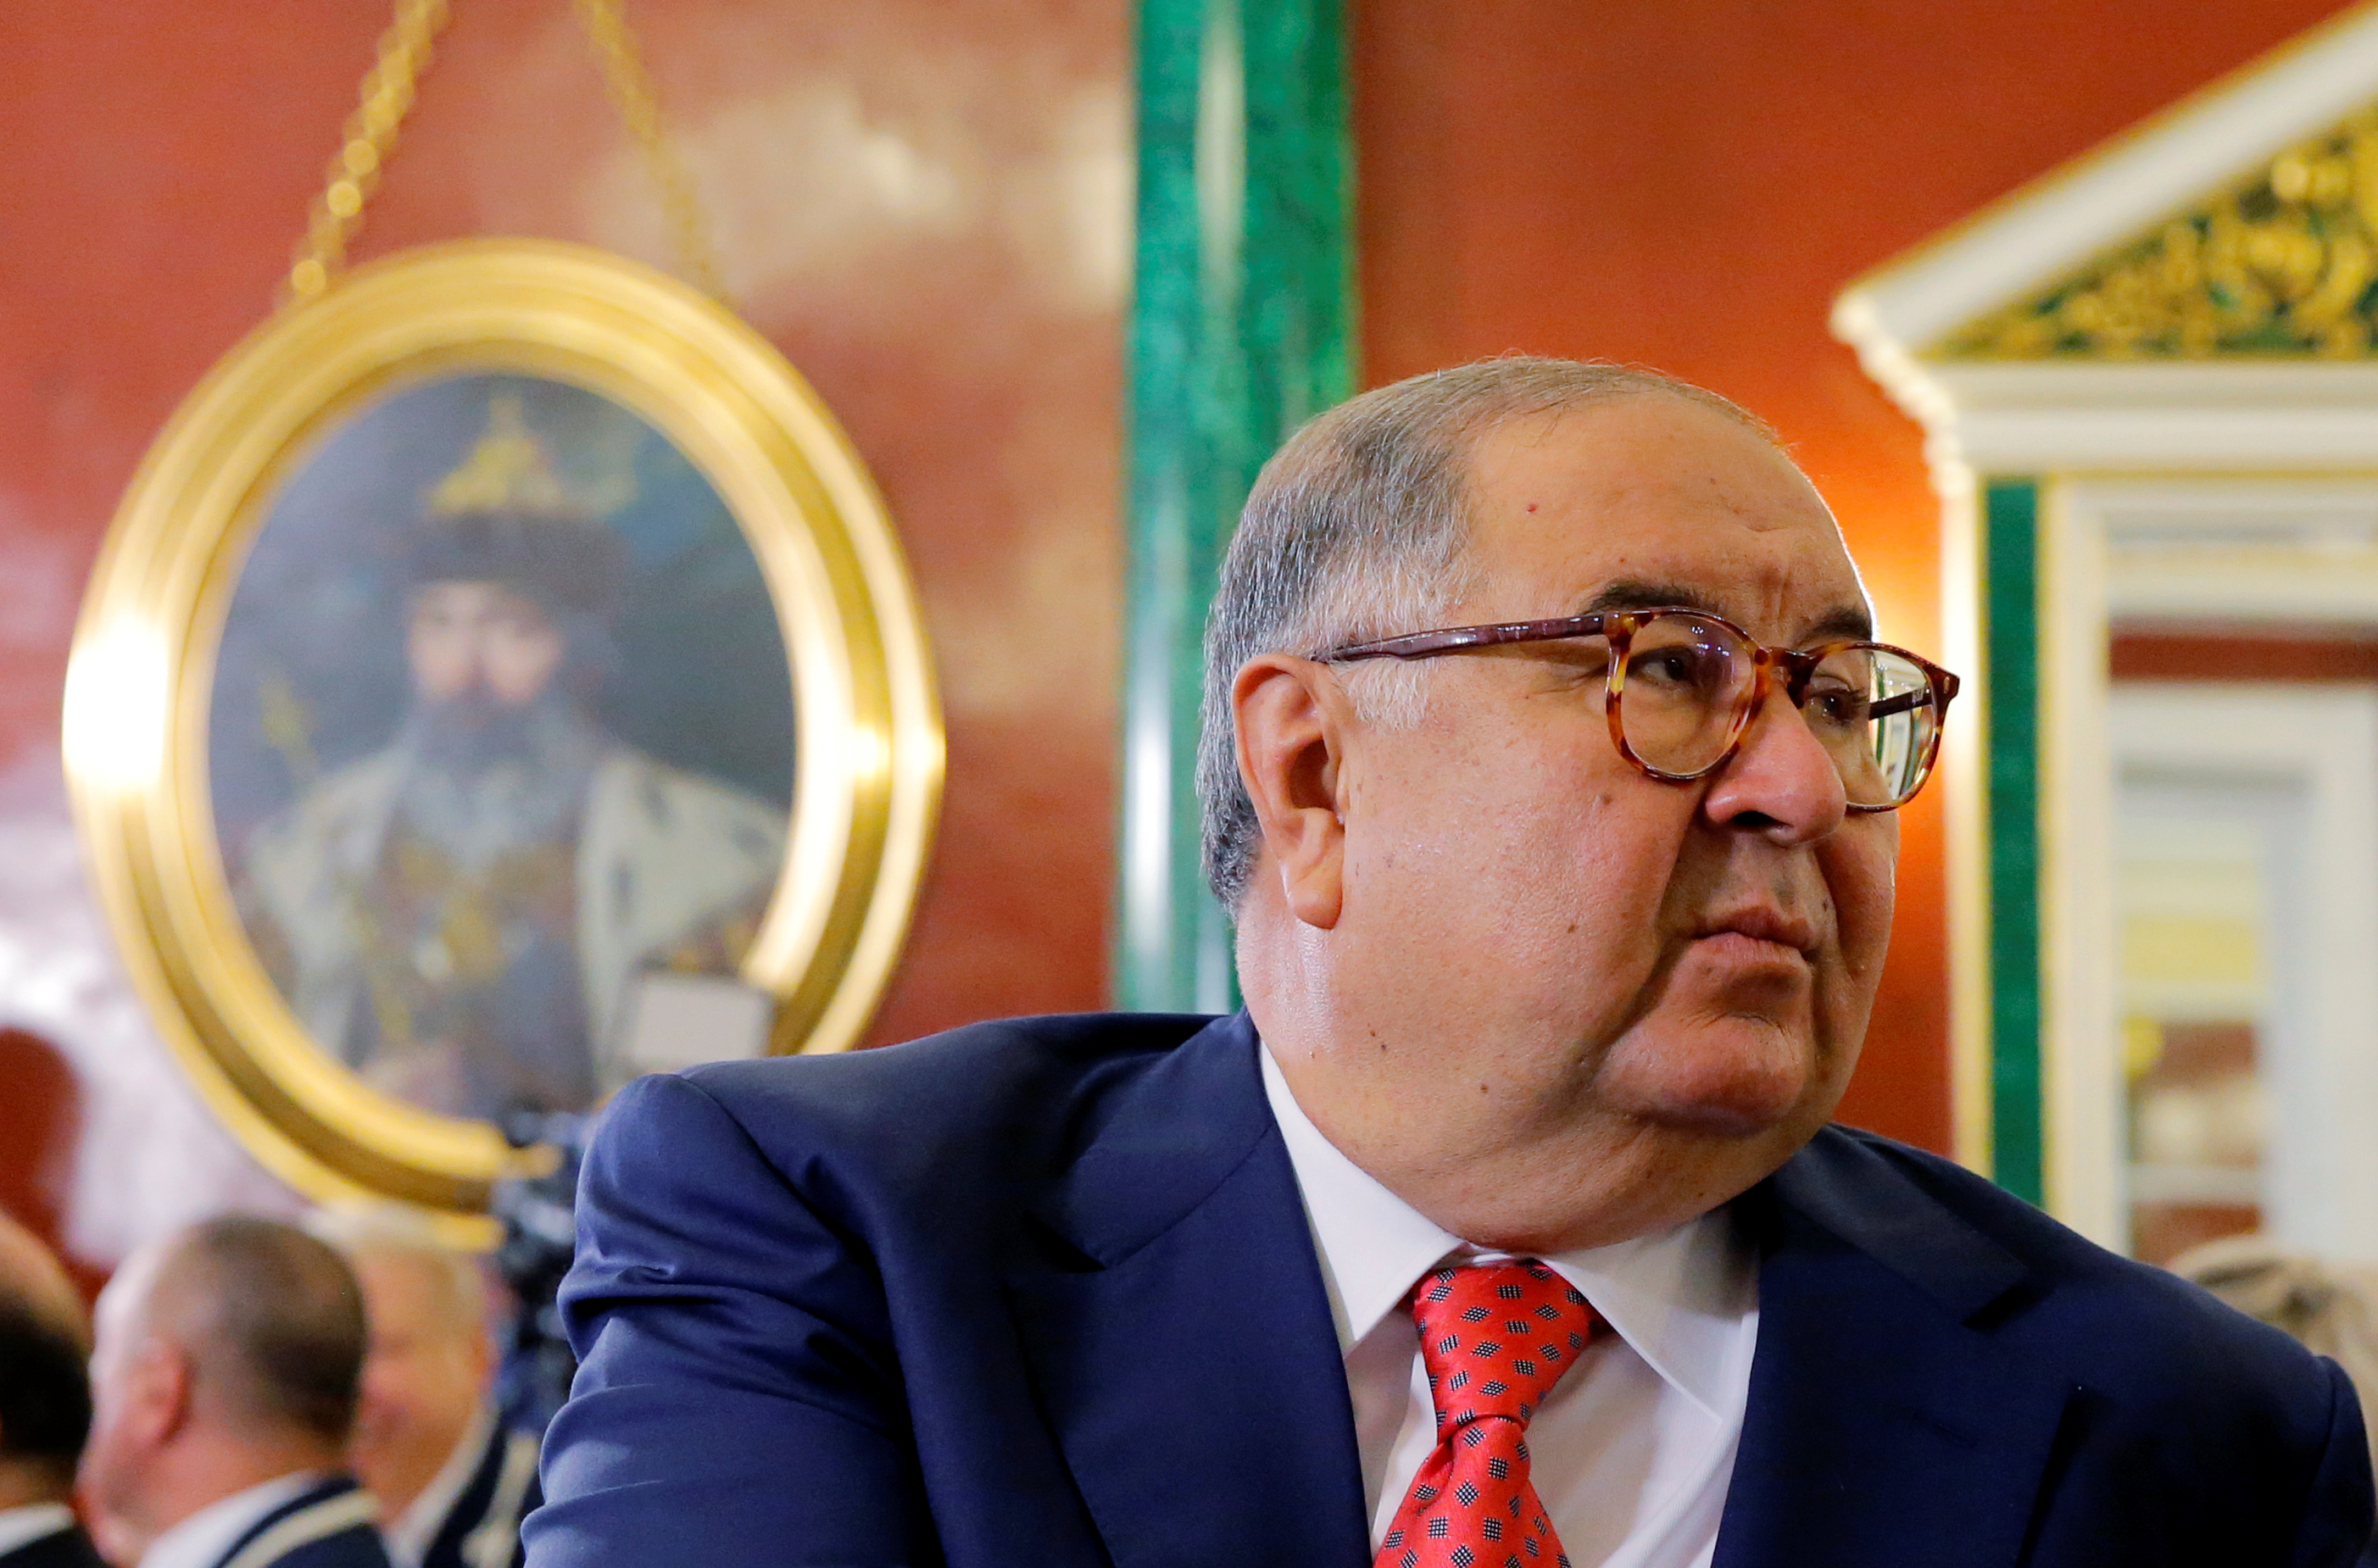 Russian businessman and president of the International Fencing Federation (FIE) Alisher Usmanov attends an awarding ceremony for Russian Olympic medallists returning home from the 2016 Rio Olympics at the Kremlin in Moscow